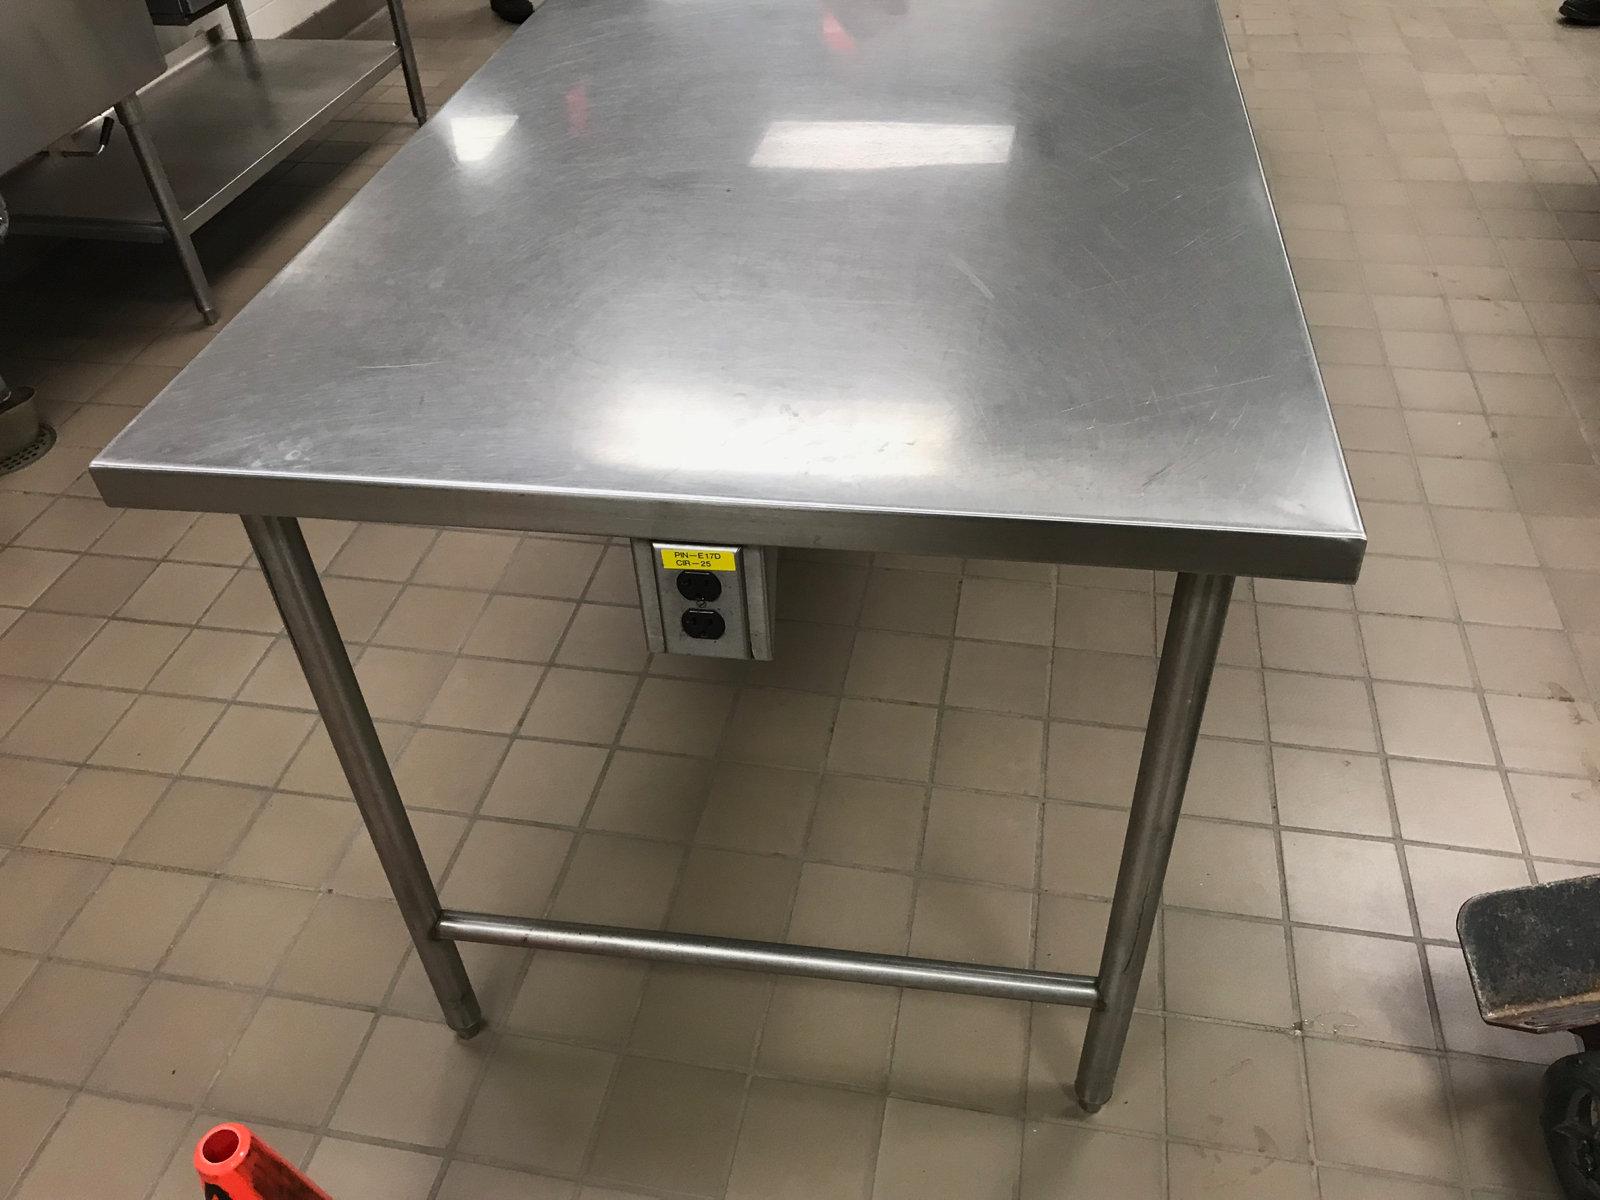 Approx 10 foot by 30 inch stainless steel table